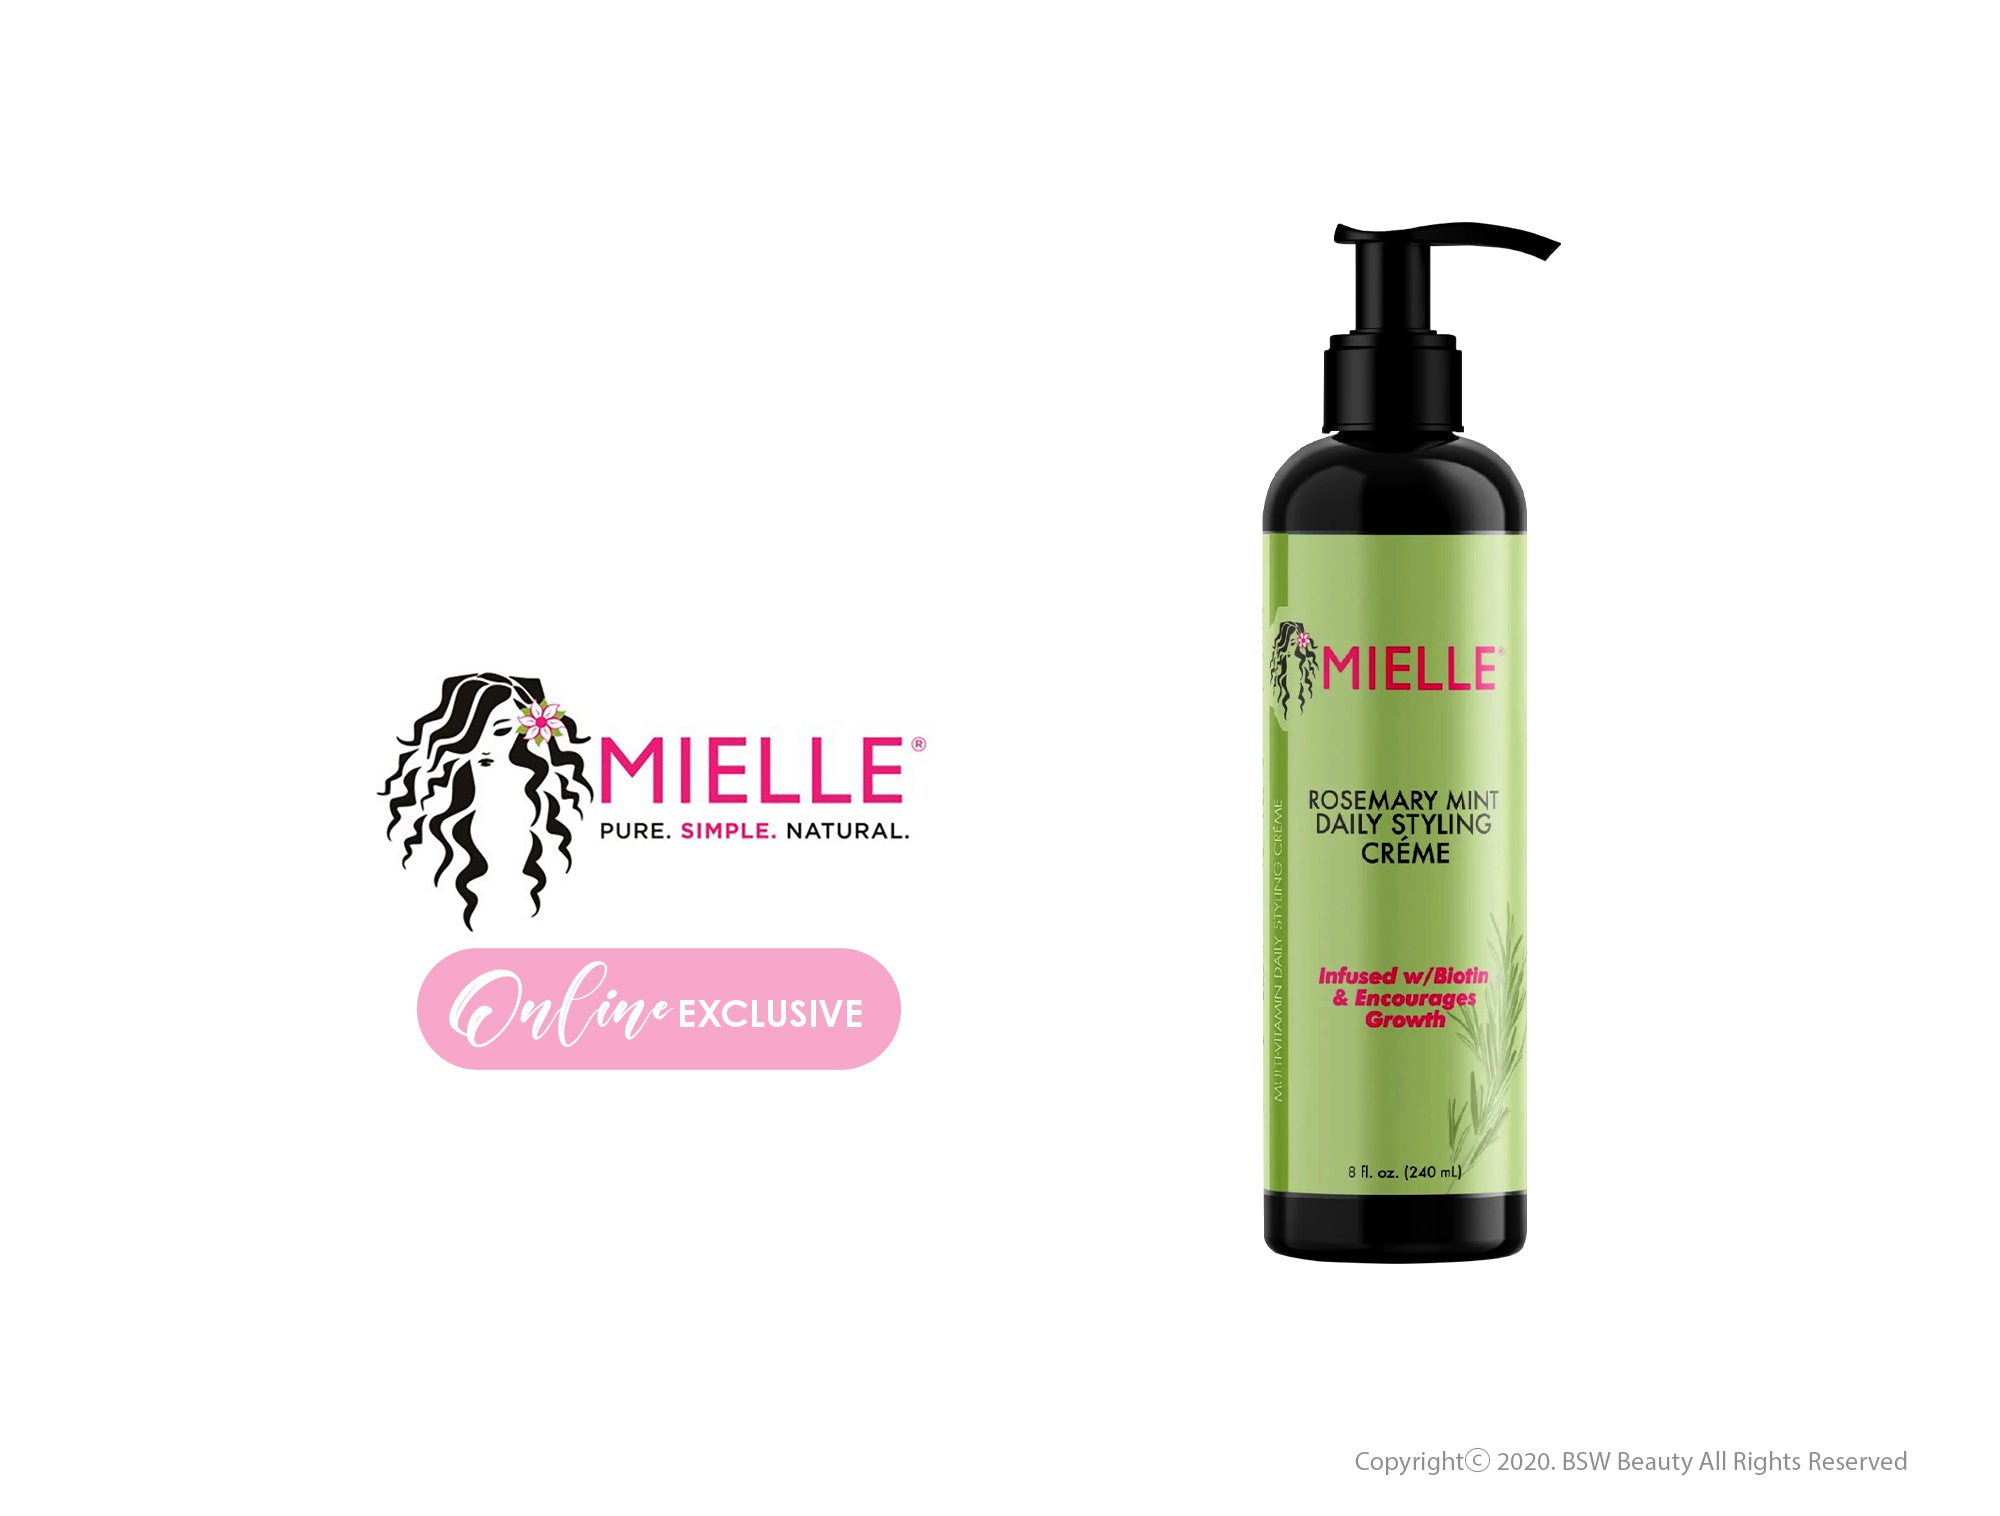 MIELLE ROSEMARY MINT DAILY STYLING CRÉME INFUSED W/ BIOTIN & ENCOURAGES GROWTH 8oz